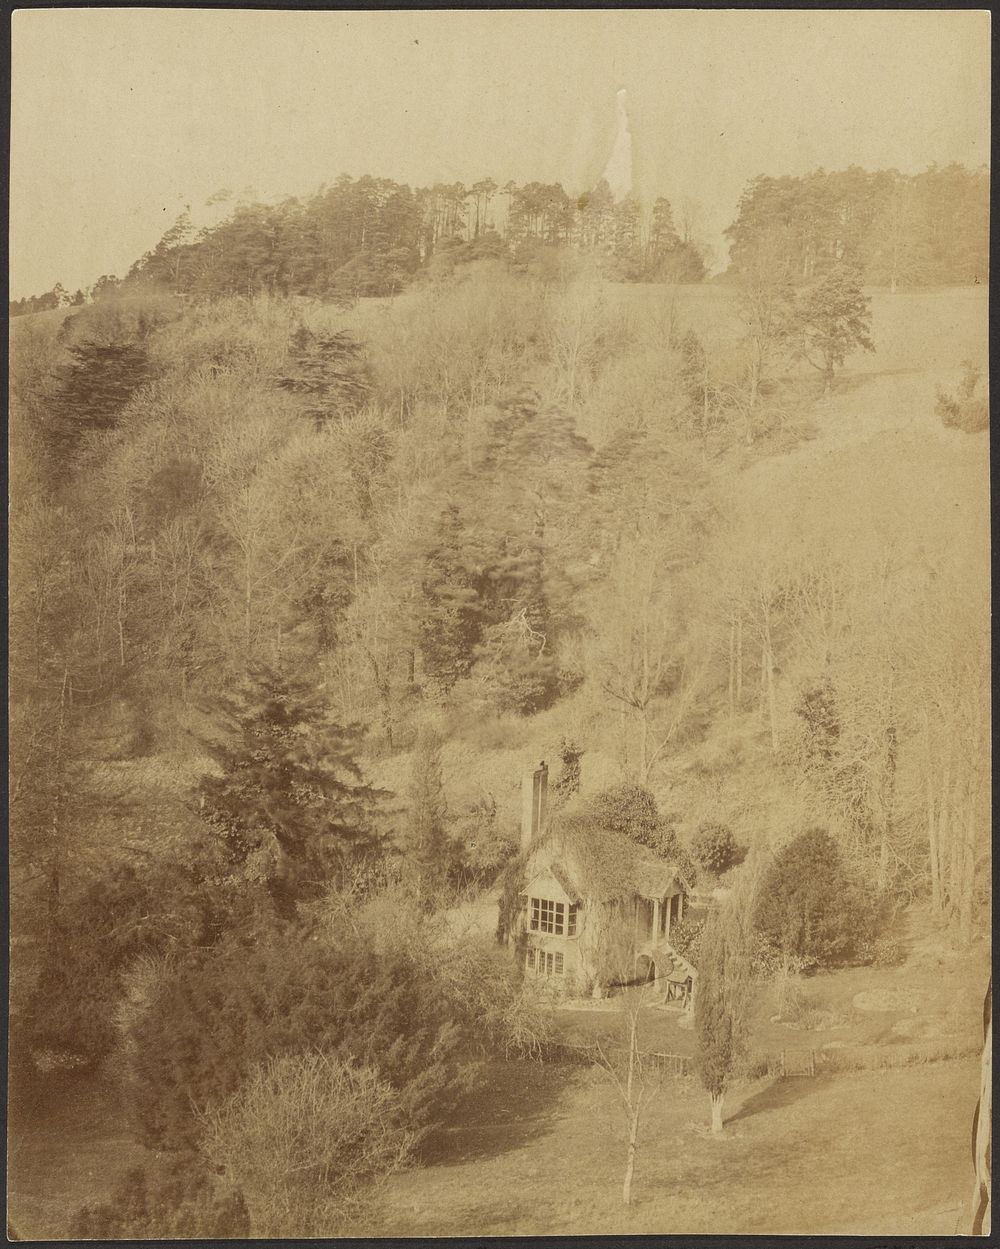 View of a Small House, with a High Portico, in a Wooded Valley